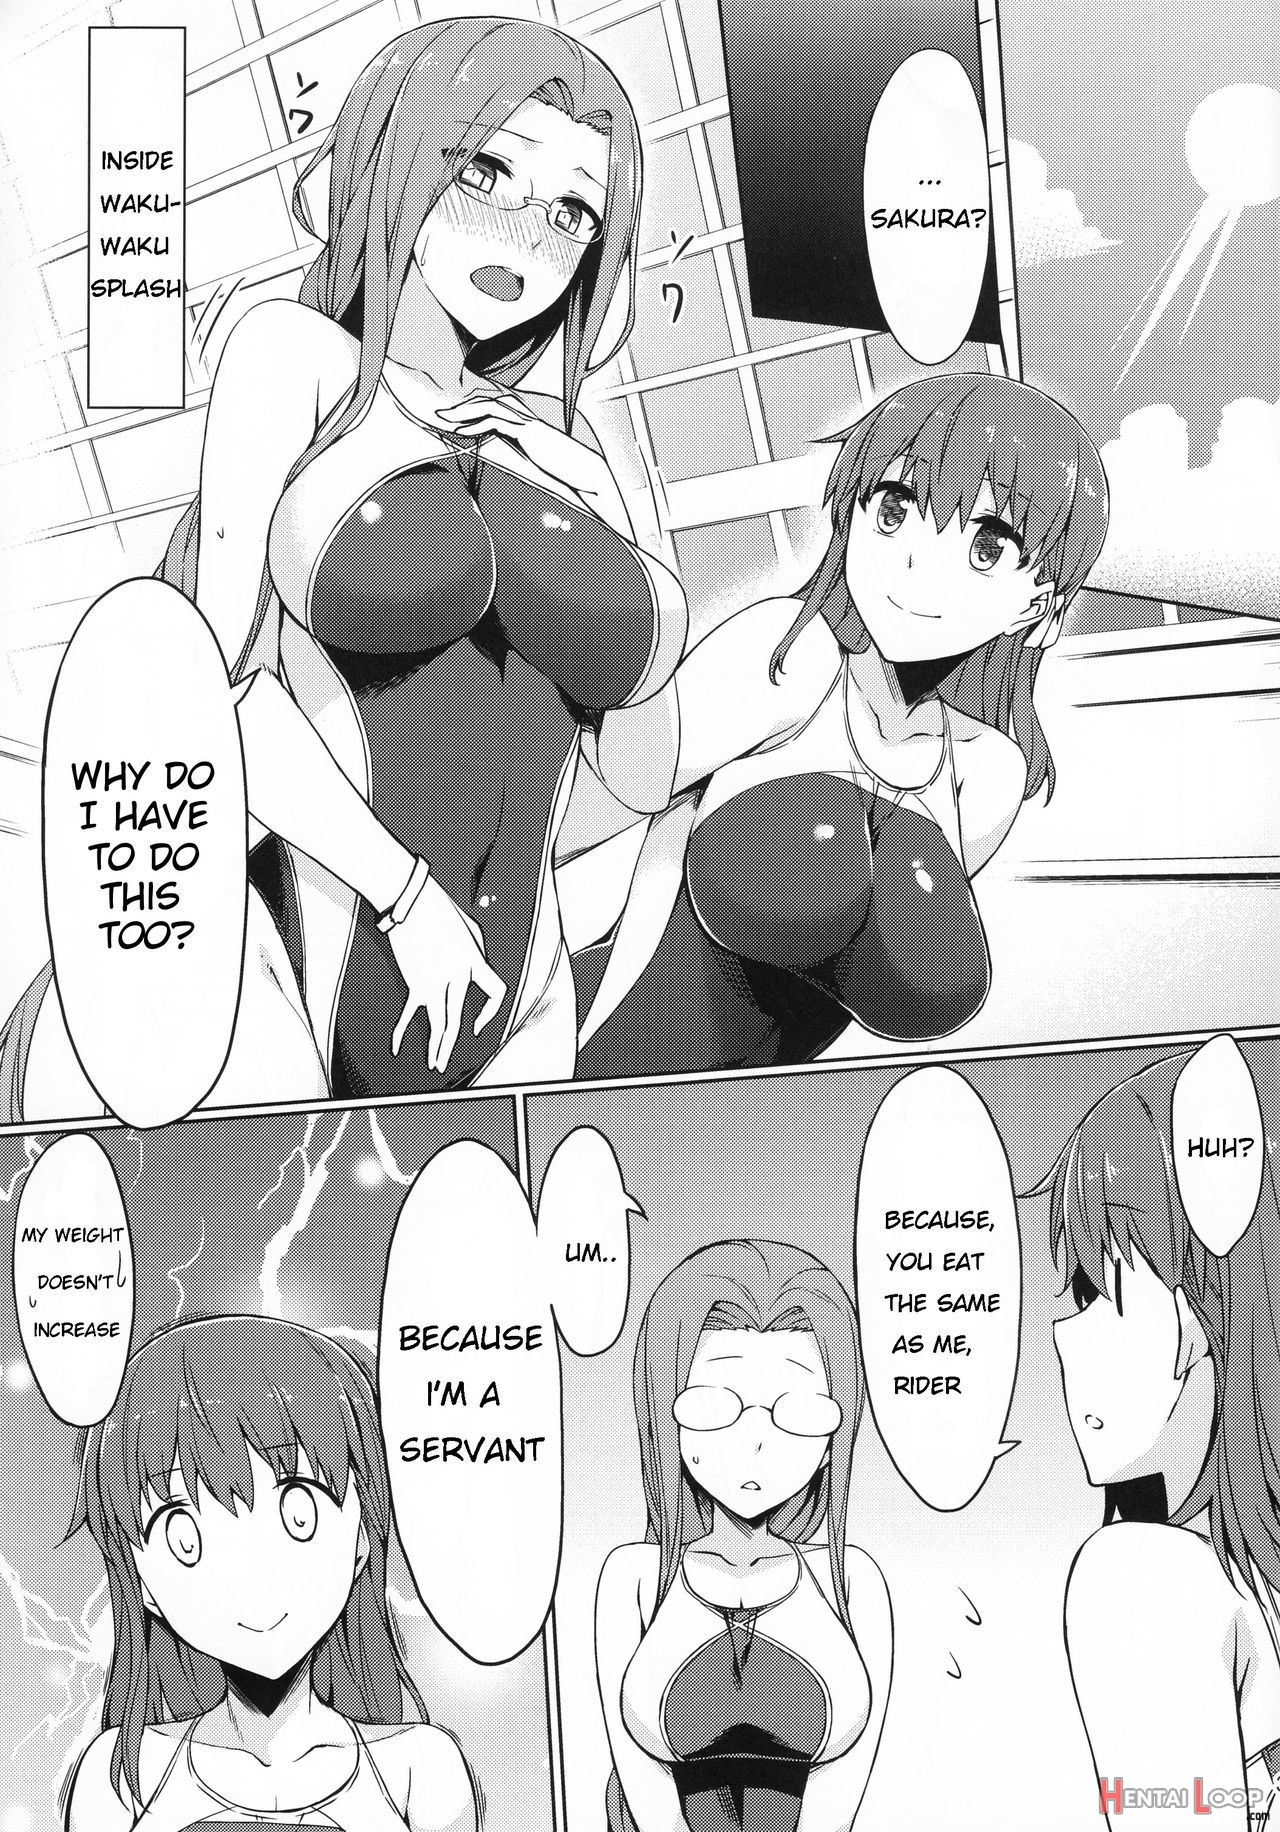 Ridersan And Swimsuit page 4